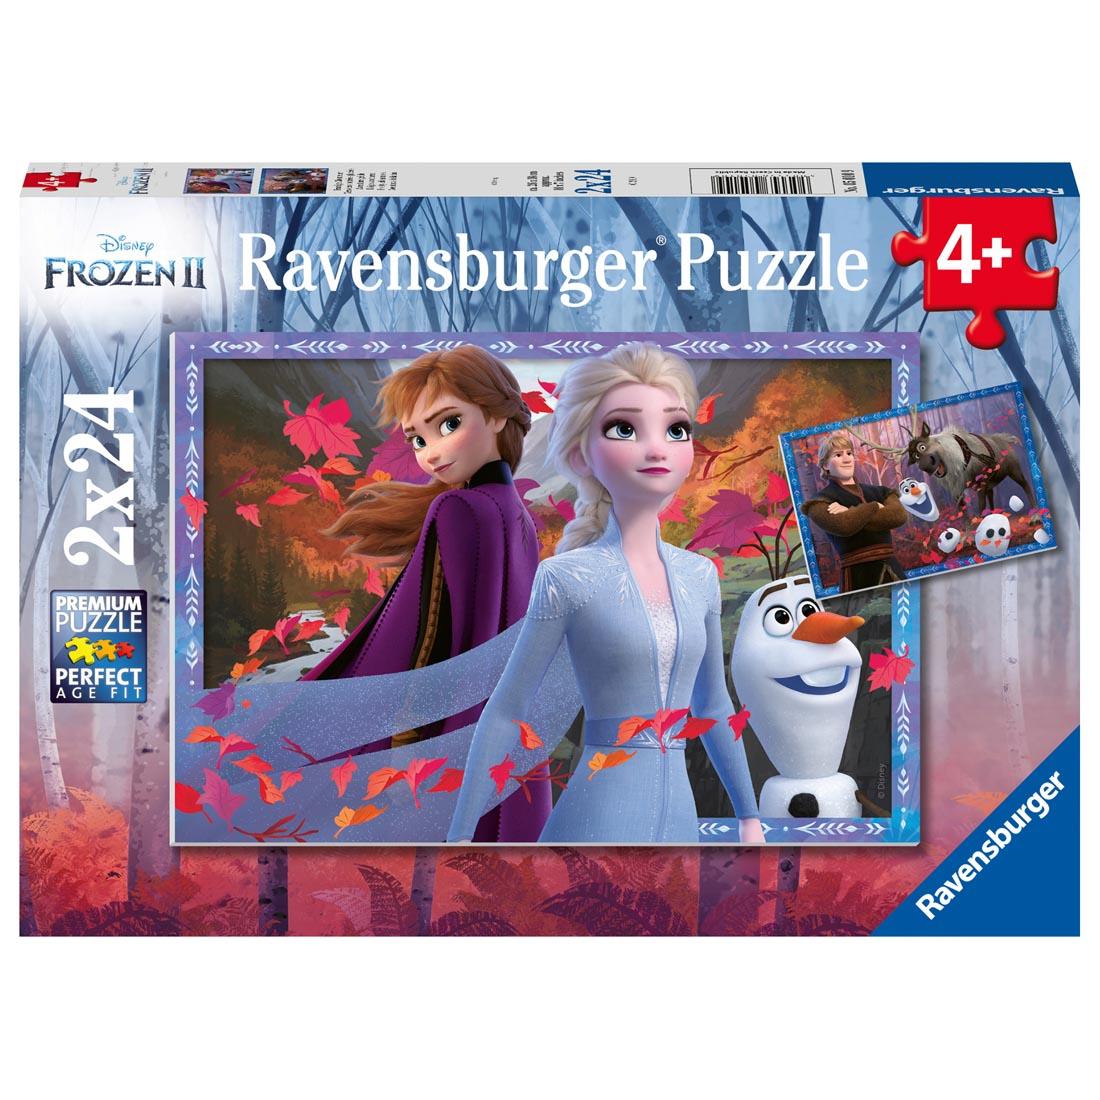 Frozen II Frosty Adventures 24-Piece Puzzles by Ravensburger